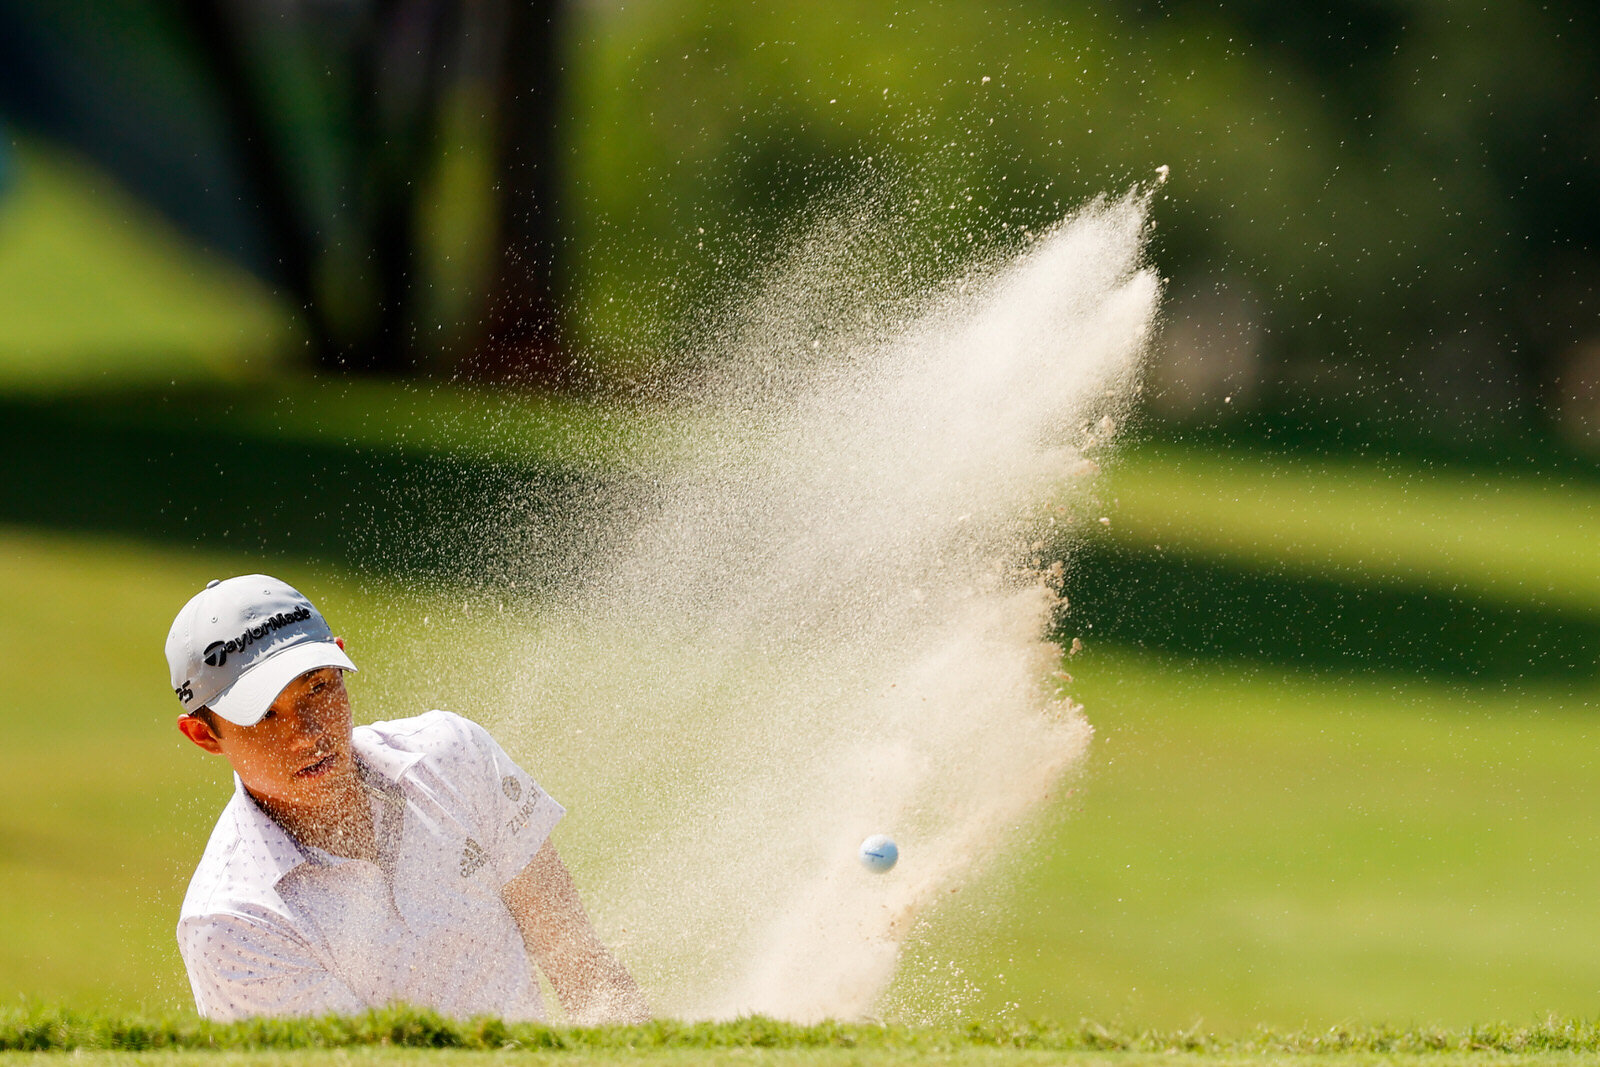  ATLANTA, GEORGIA - SEPTEMBER 06: Collin Morikawa of the United States holes out from a bunker on the first hole during the third round of the TOUR Championship at East Lake Golf Club on September 06, 2020 in Atlanta, Georgia. (Photo by Kevin C. Cox/